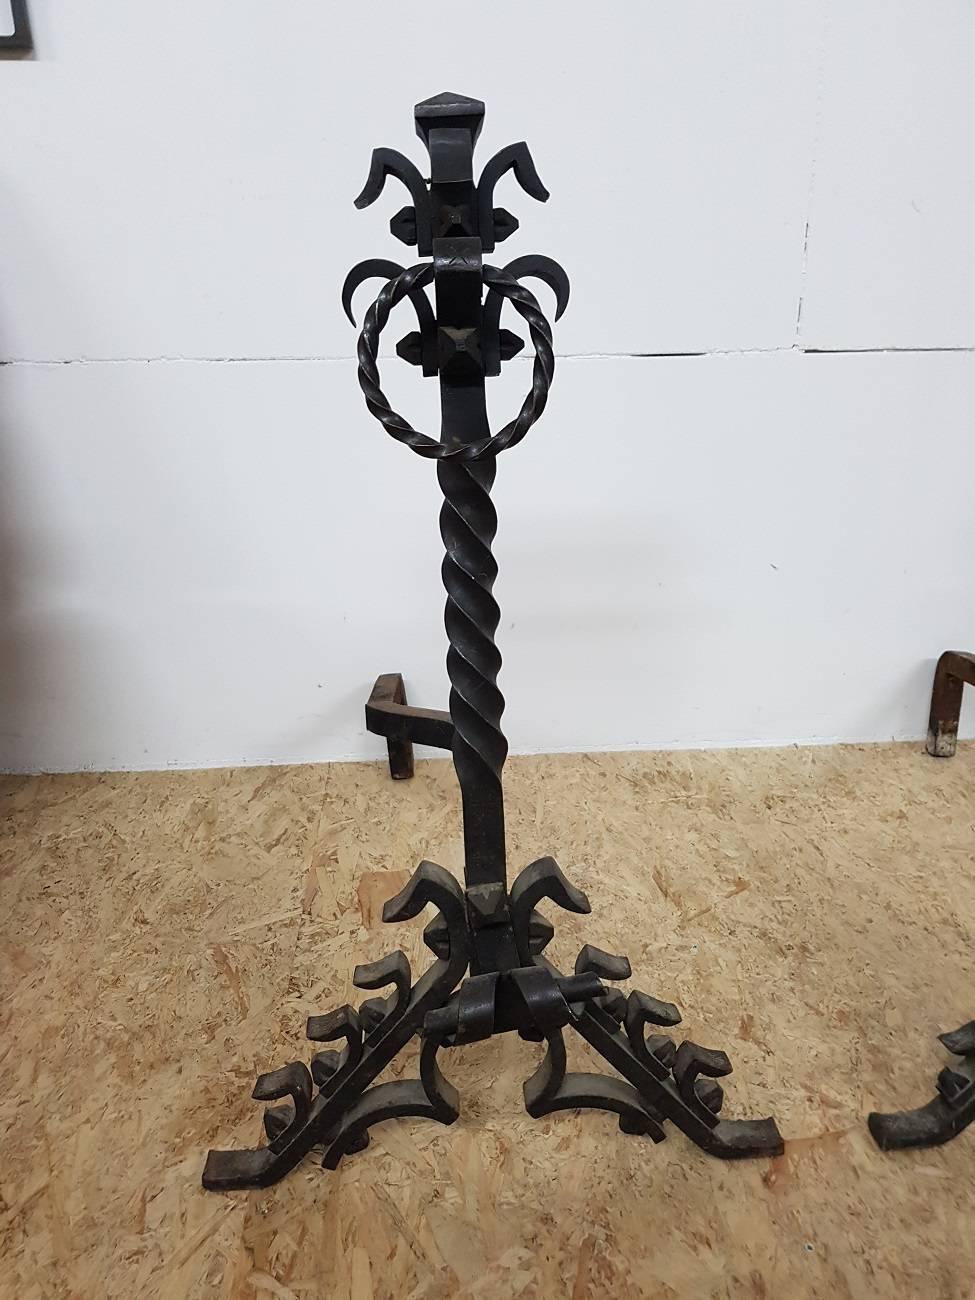 Two large French Gothic style andirons or chenets, made of forged metal with burled twisted and rough looking elements. They are from circa 1950-1960 and in a fair condition.

The measurements are:
depth 74 cm/ 29.1 inch.
width 46 cm/ 18.1